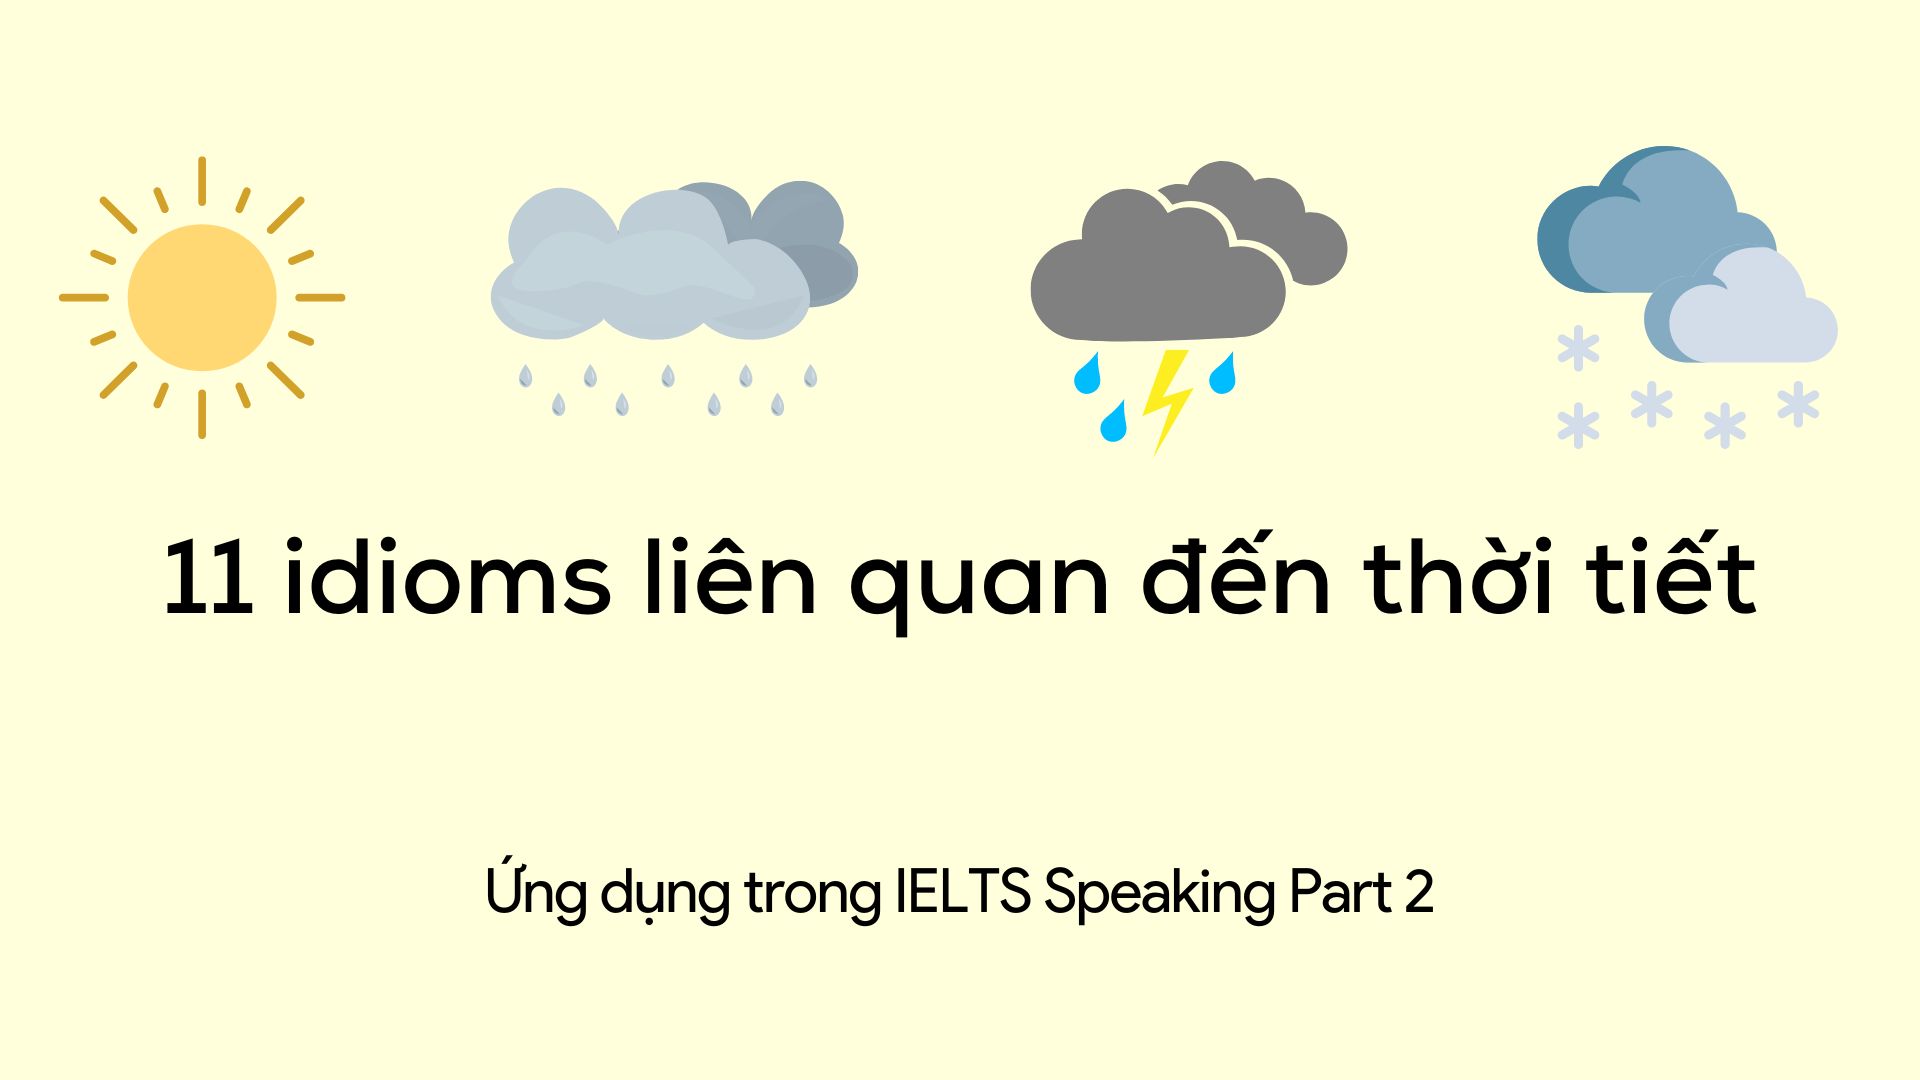 thanh-ngu-ve-thoi-tiet-ung-dung-trong-ielts-speaking-part-2